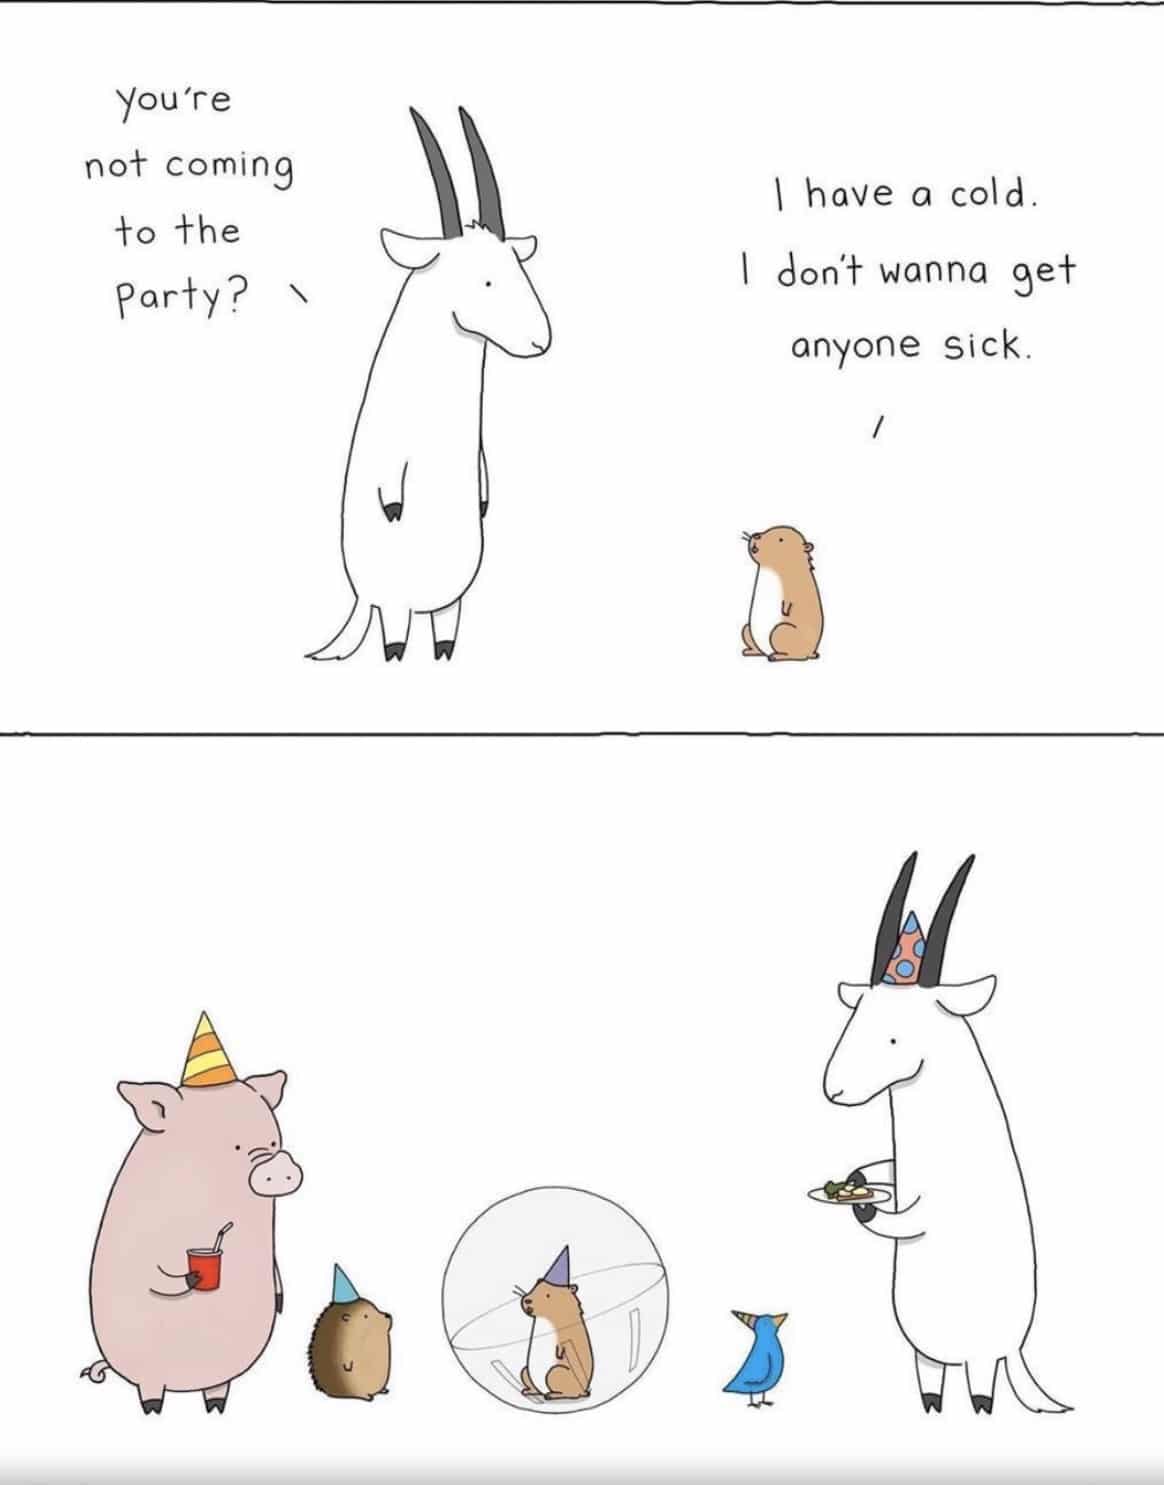 Cute, wholesome memes, People, Liz Climo Wholesome Memes Cute, wholesome memes, People, Liz Climo text: You're nof coming {o åhe \ have a cold. I don wanna gef anyone Sick. 